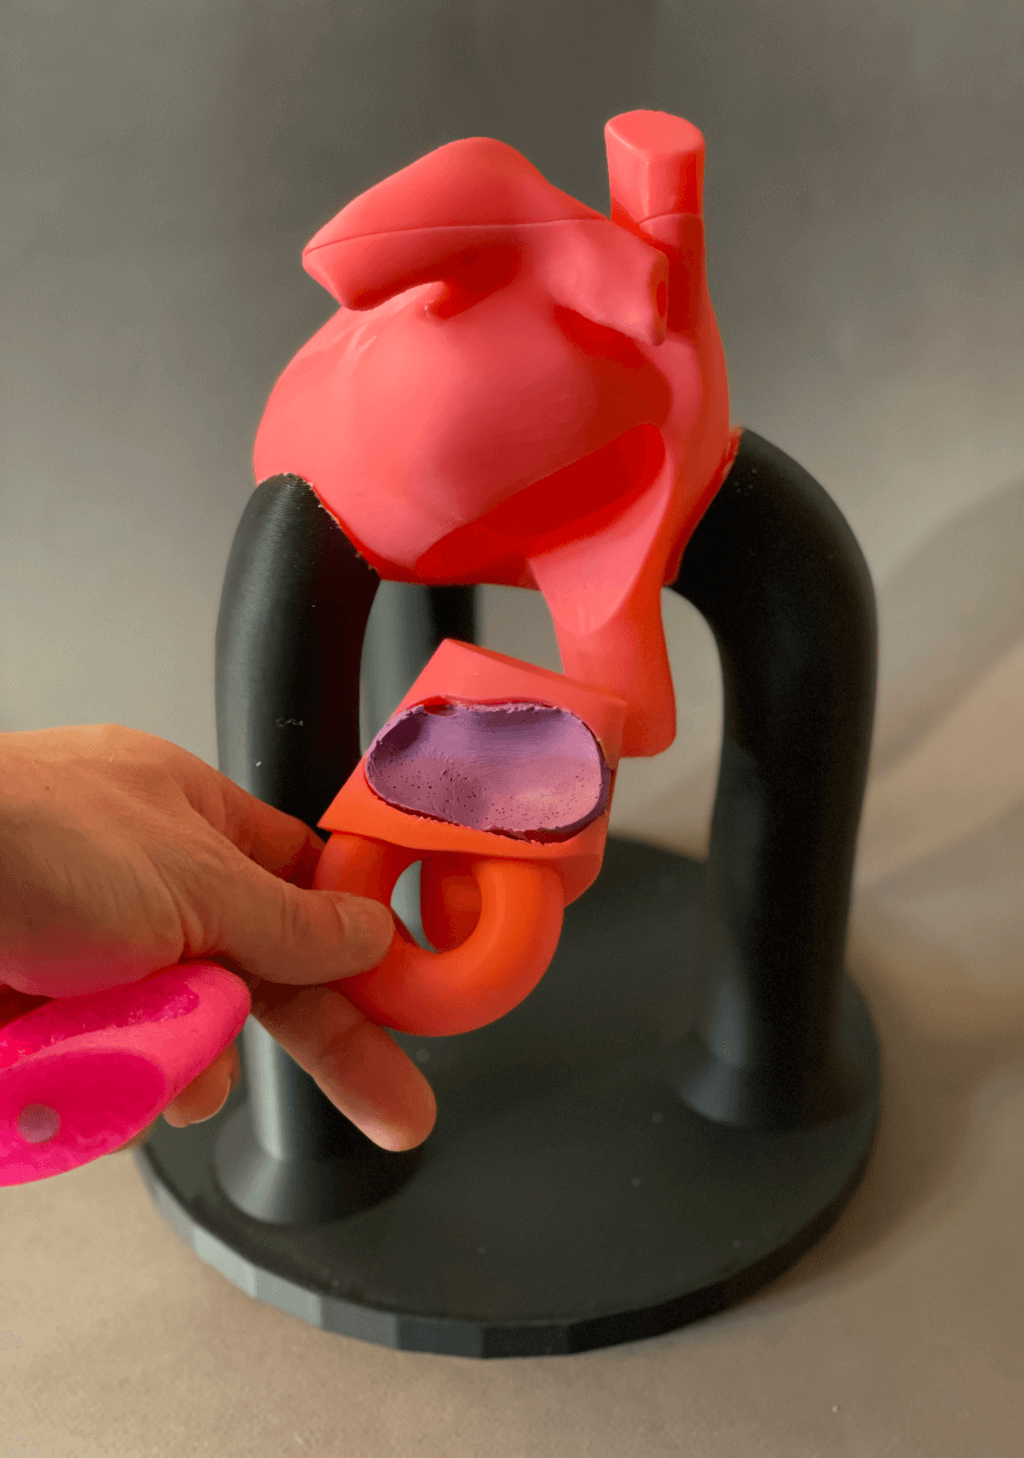 3D printed catheter ablation trainer